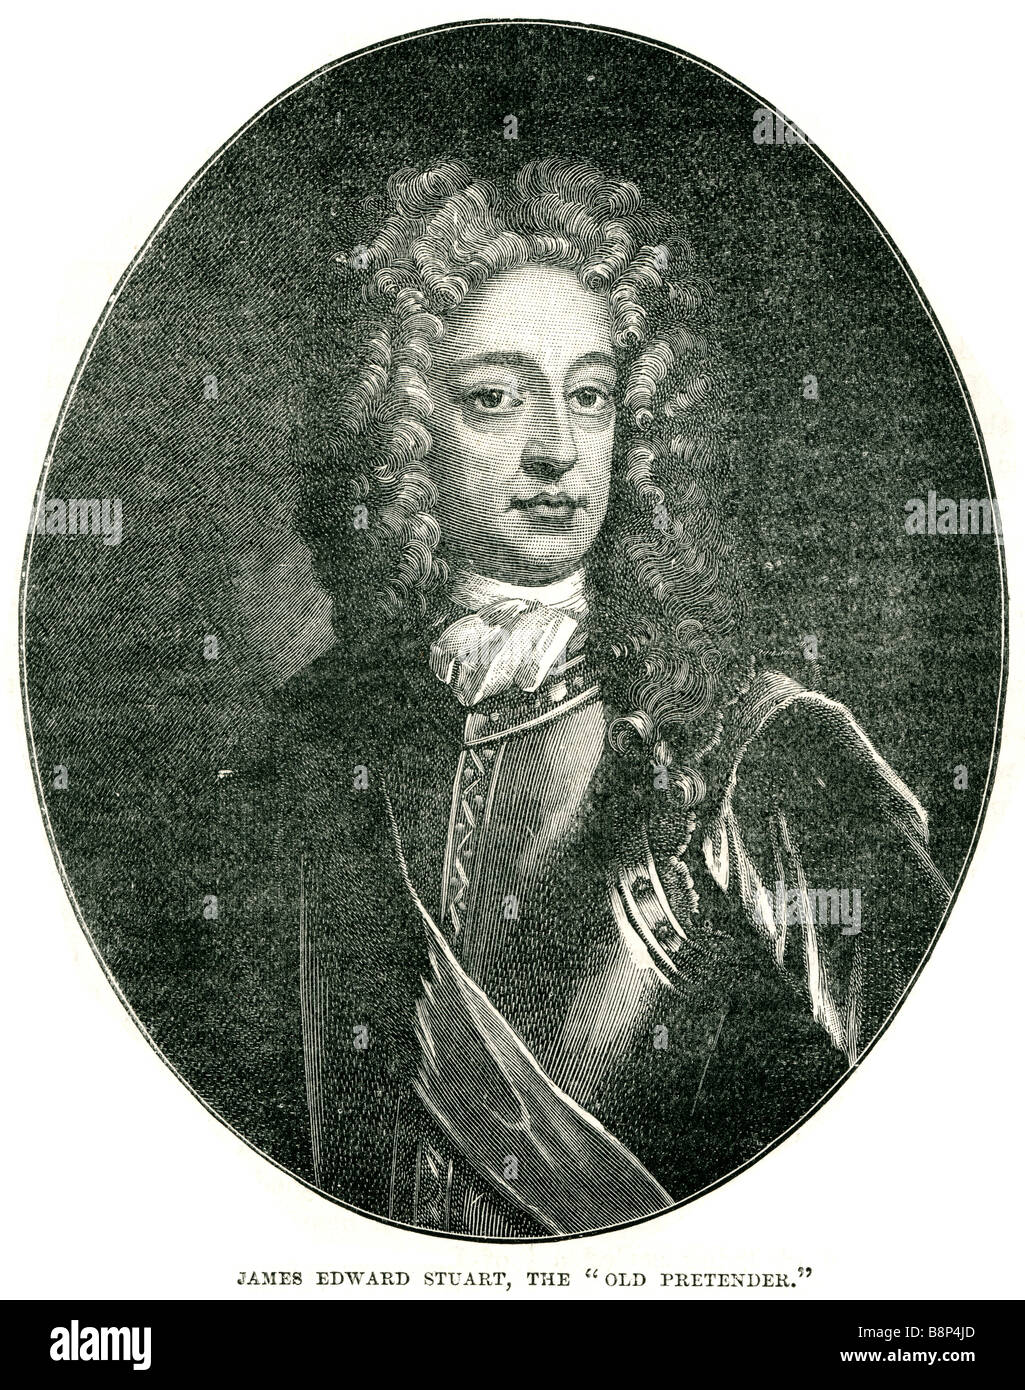 Prince James Prince of Wales James Francis Edward Stuart Old Pretender The Old Chevalier 10 June 1688 – 1 January 1766 Stock Photo